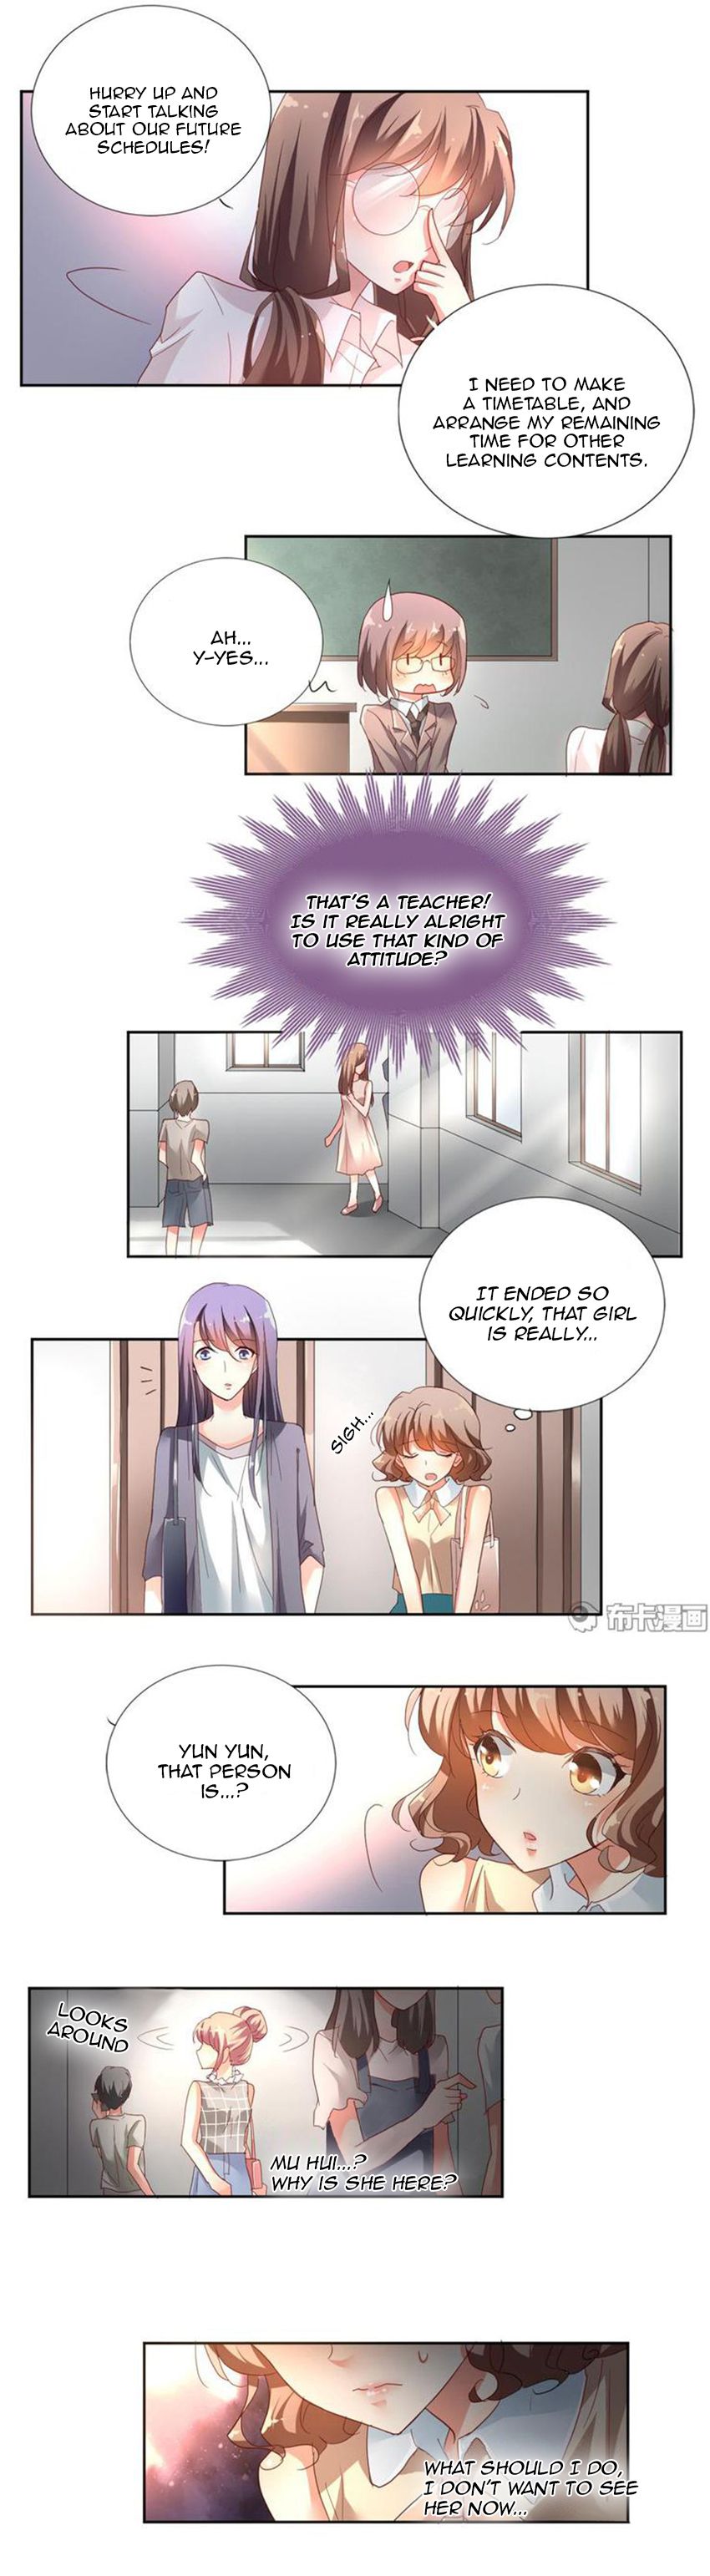 She Who is the Most Special to Me Ch. 14